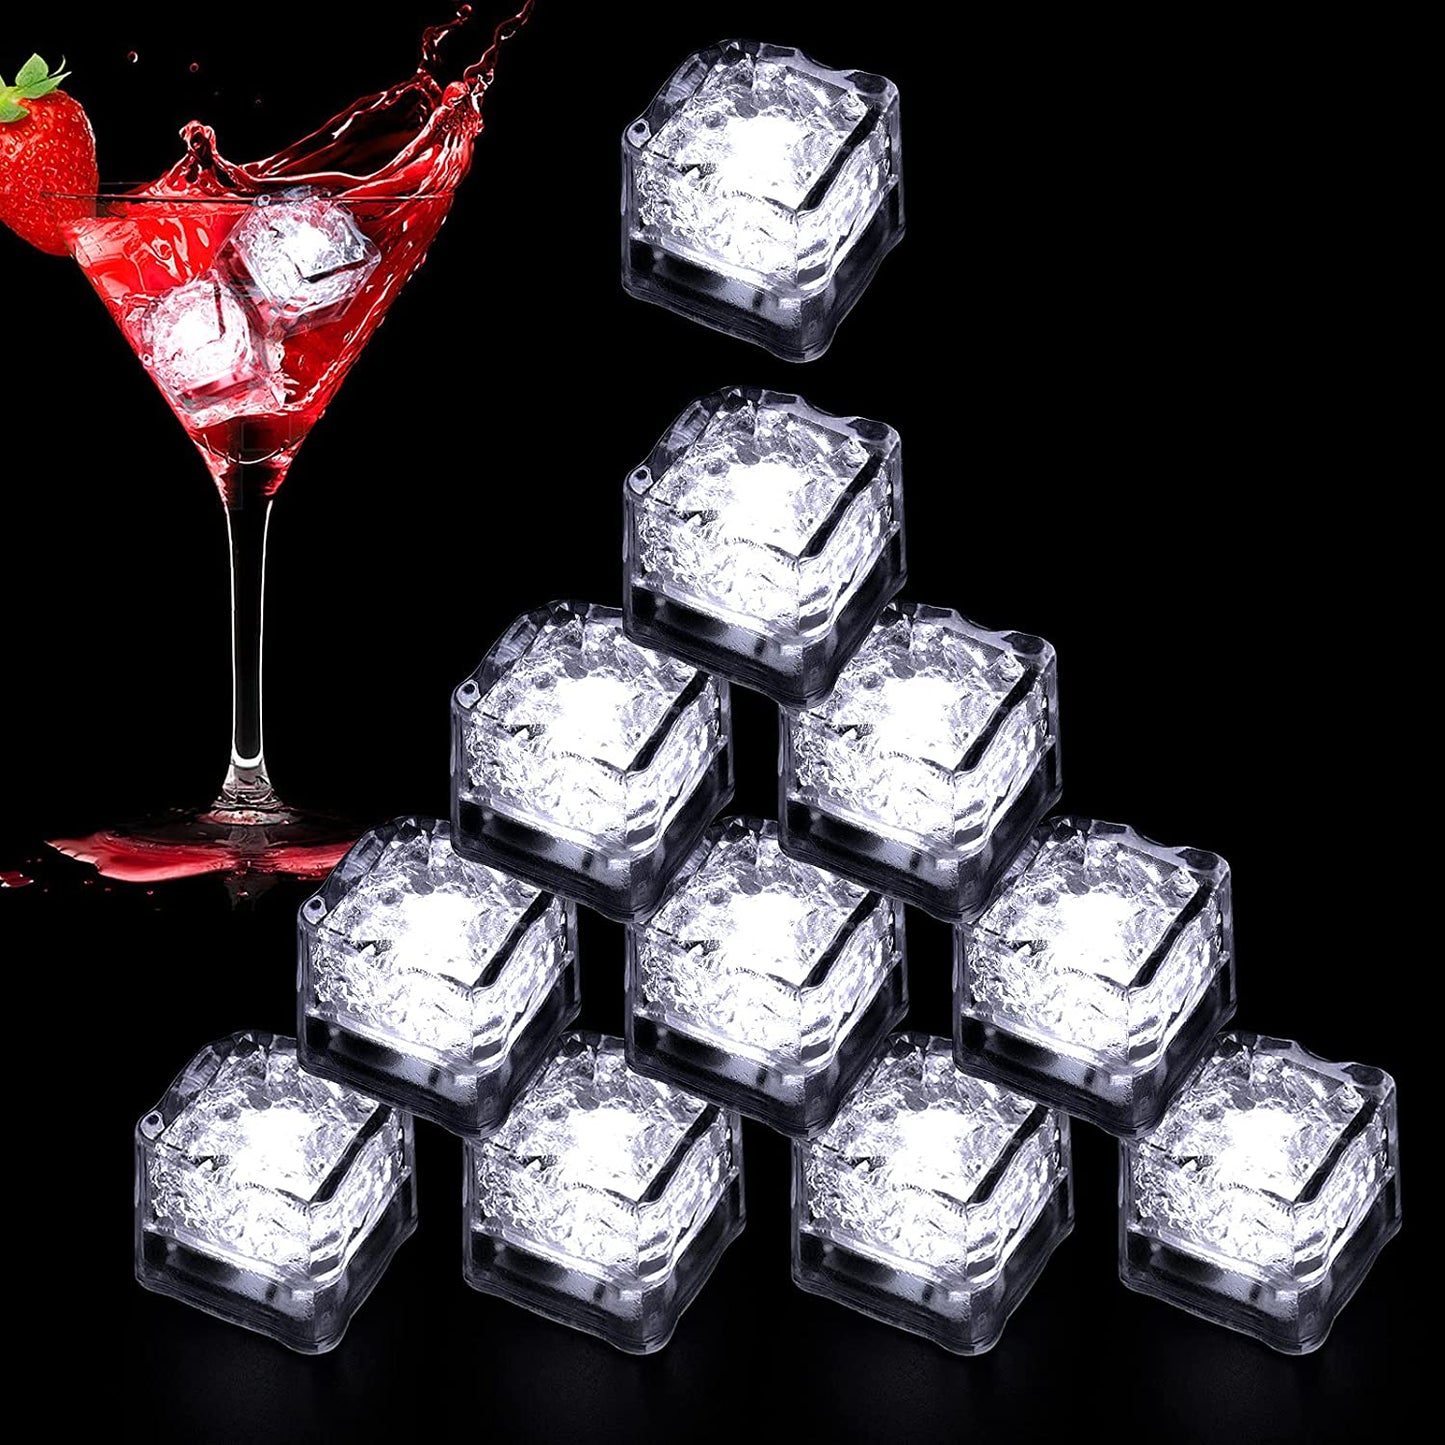 Light up Ice Cubes for Drinks,96 PCS White LED Ice Cubes Liquid Activated, Glow in the Dark Waterproof Ice Cubes for Home Bar Supplies Summer Party Wedding Decor